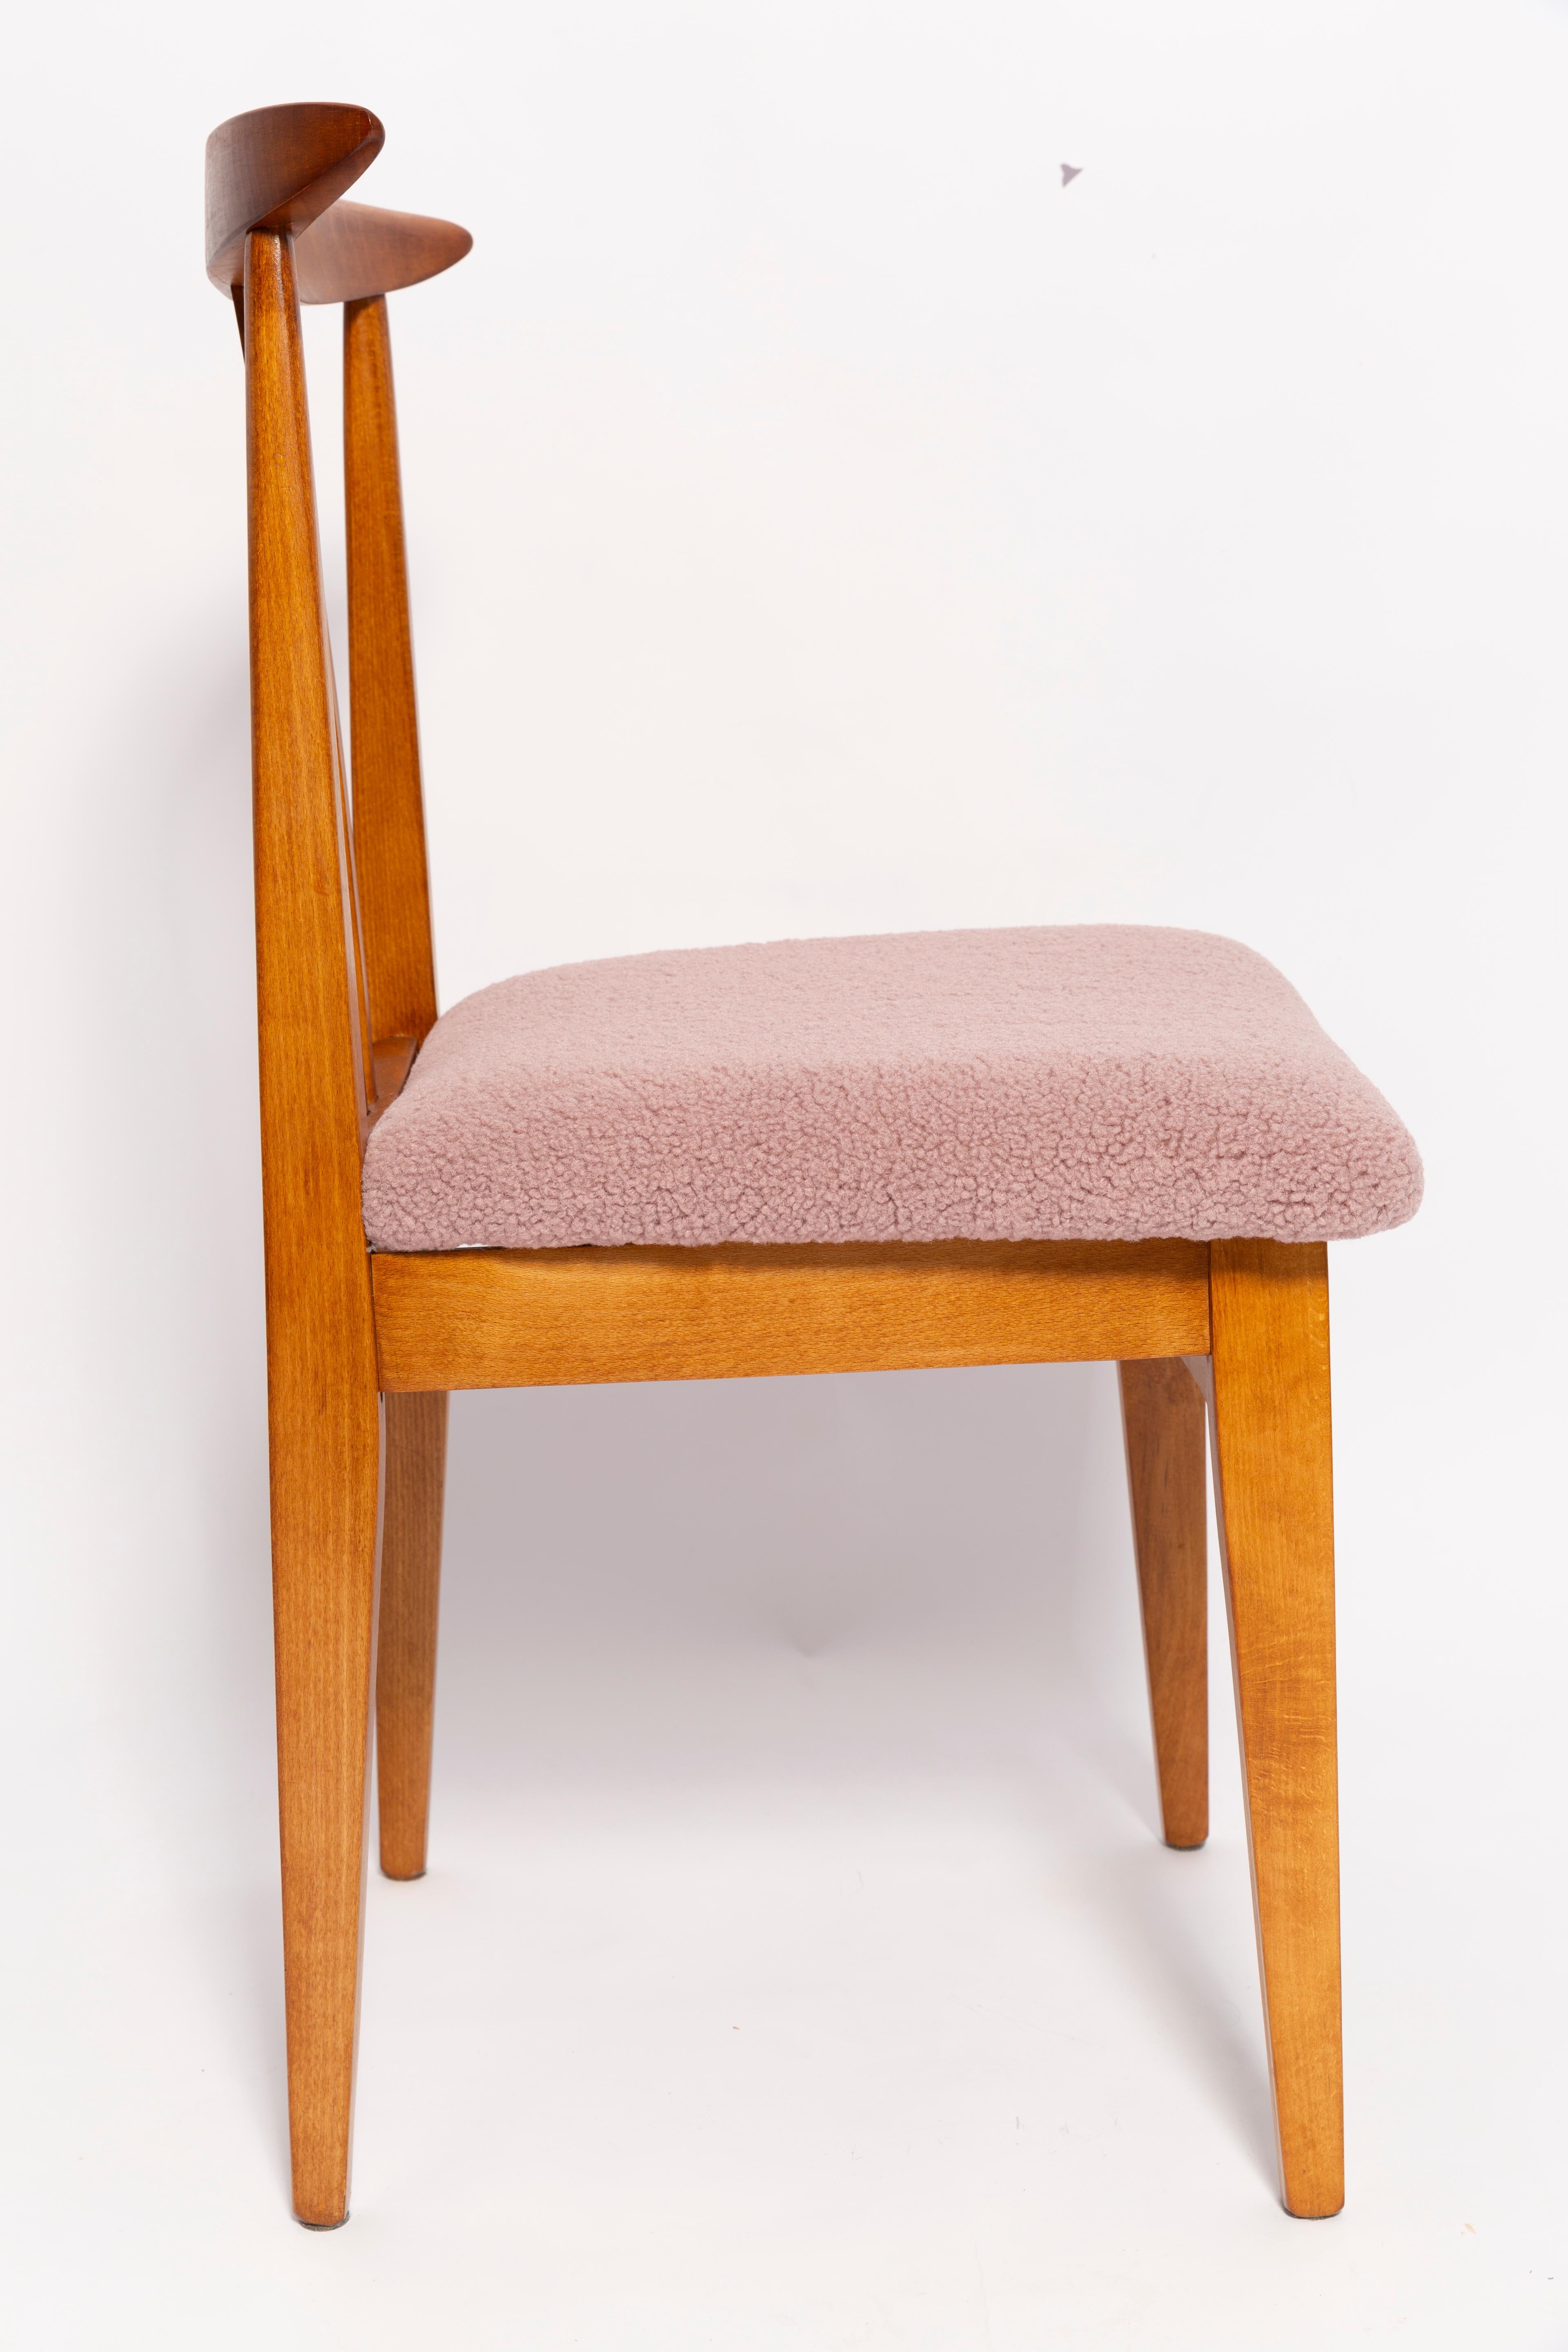 Polish Mid-Century Pink Blush Boucle Chair, by M. Zielinski, Europe, 1960s For Sale